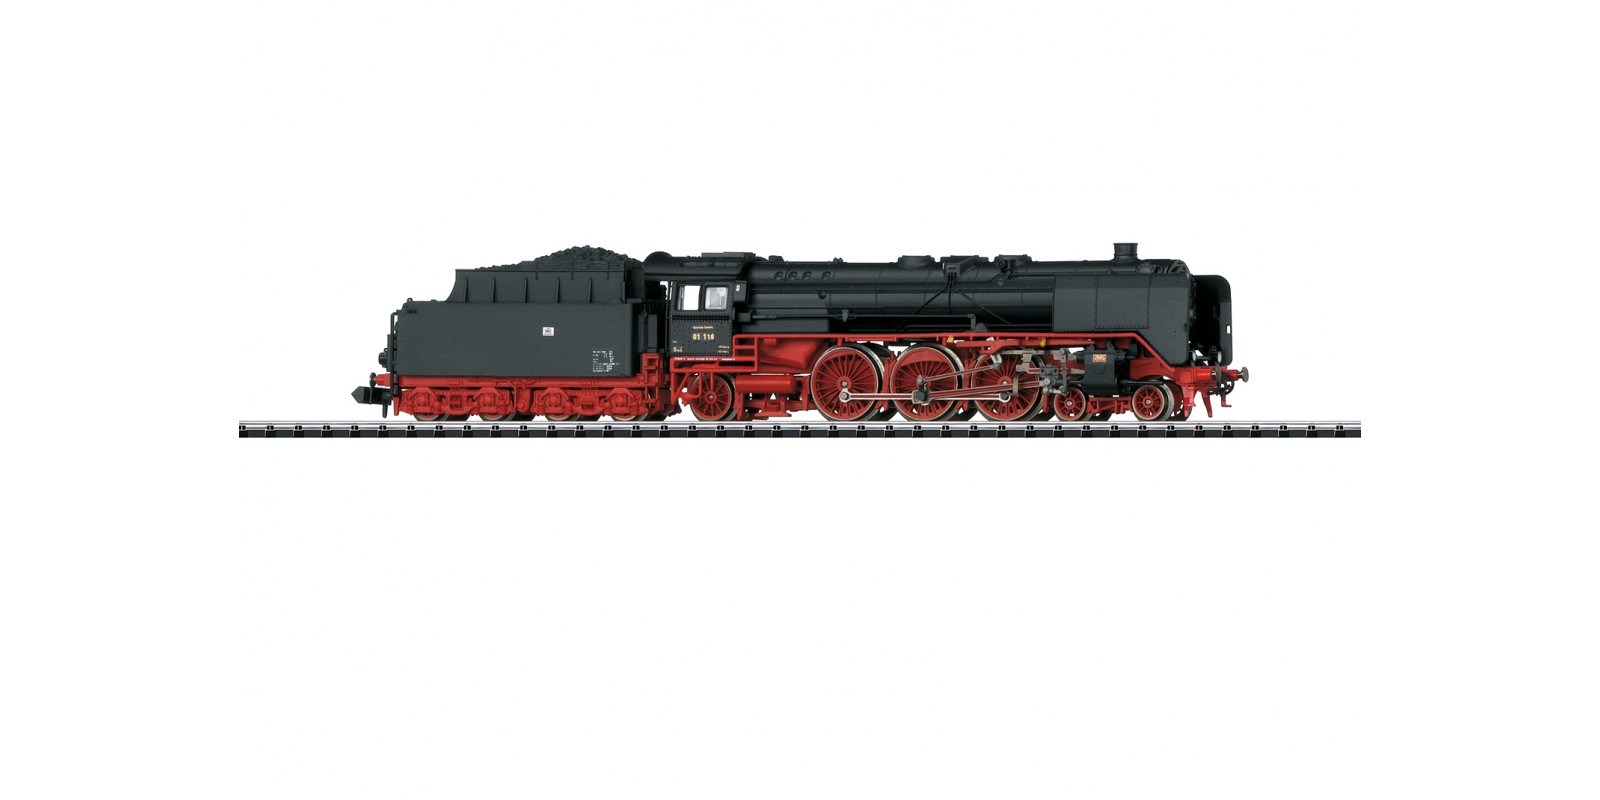 T16011 Steam Locomotive with a Tender, Road Number 01 118